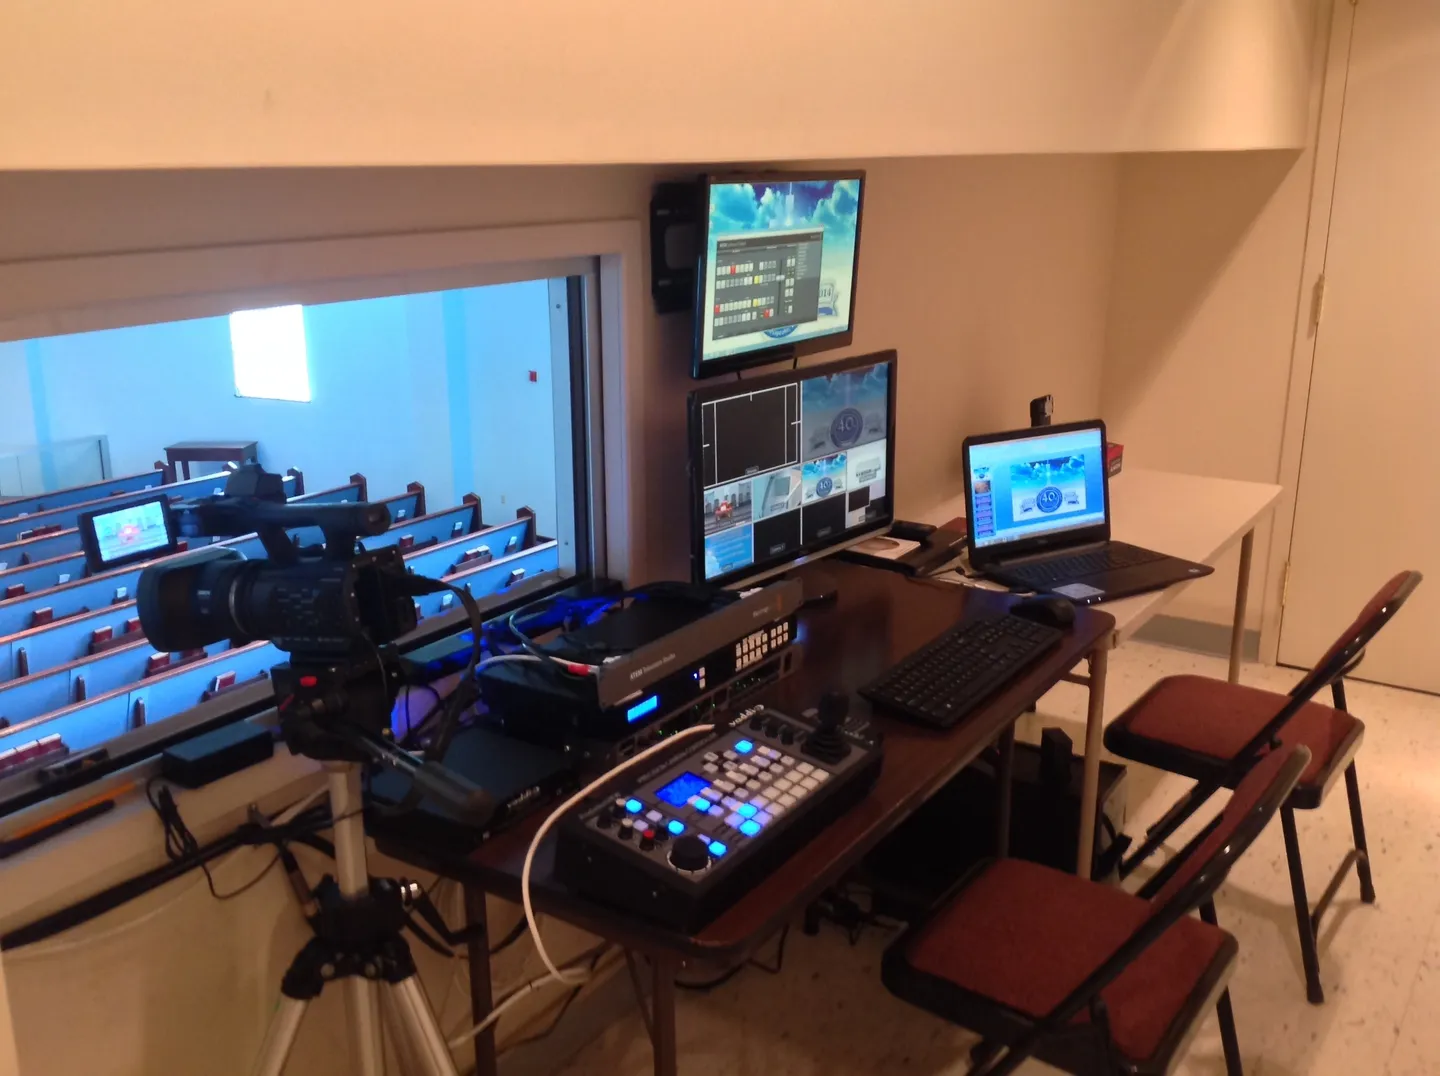 A room with several monitors and laptops on the table.